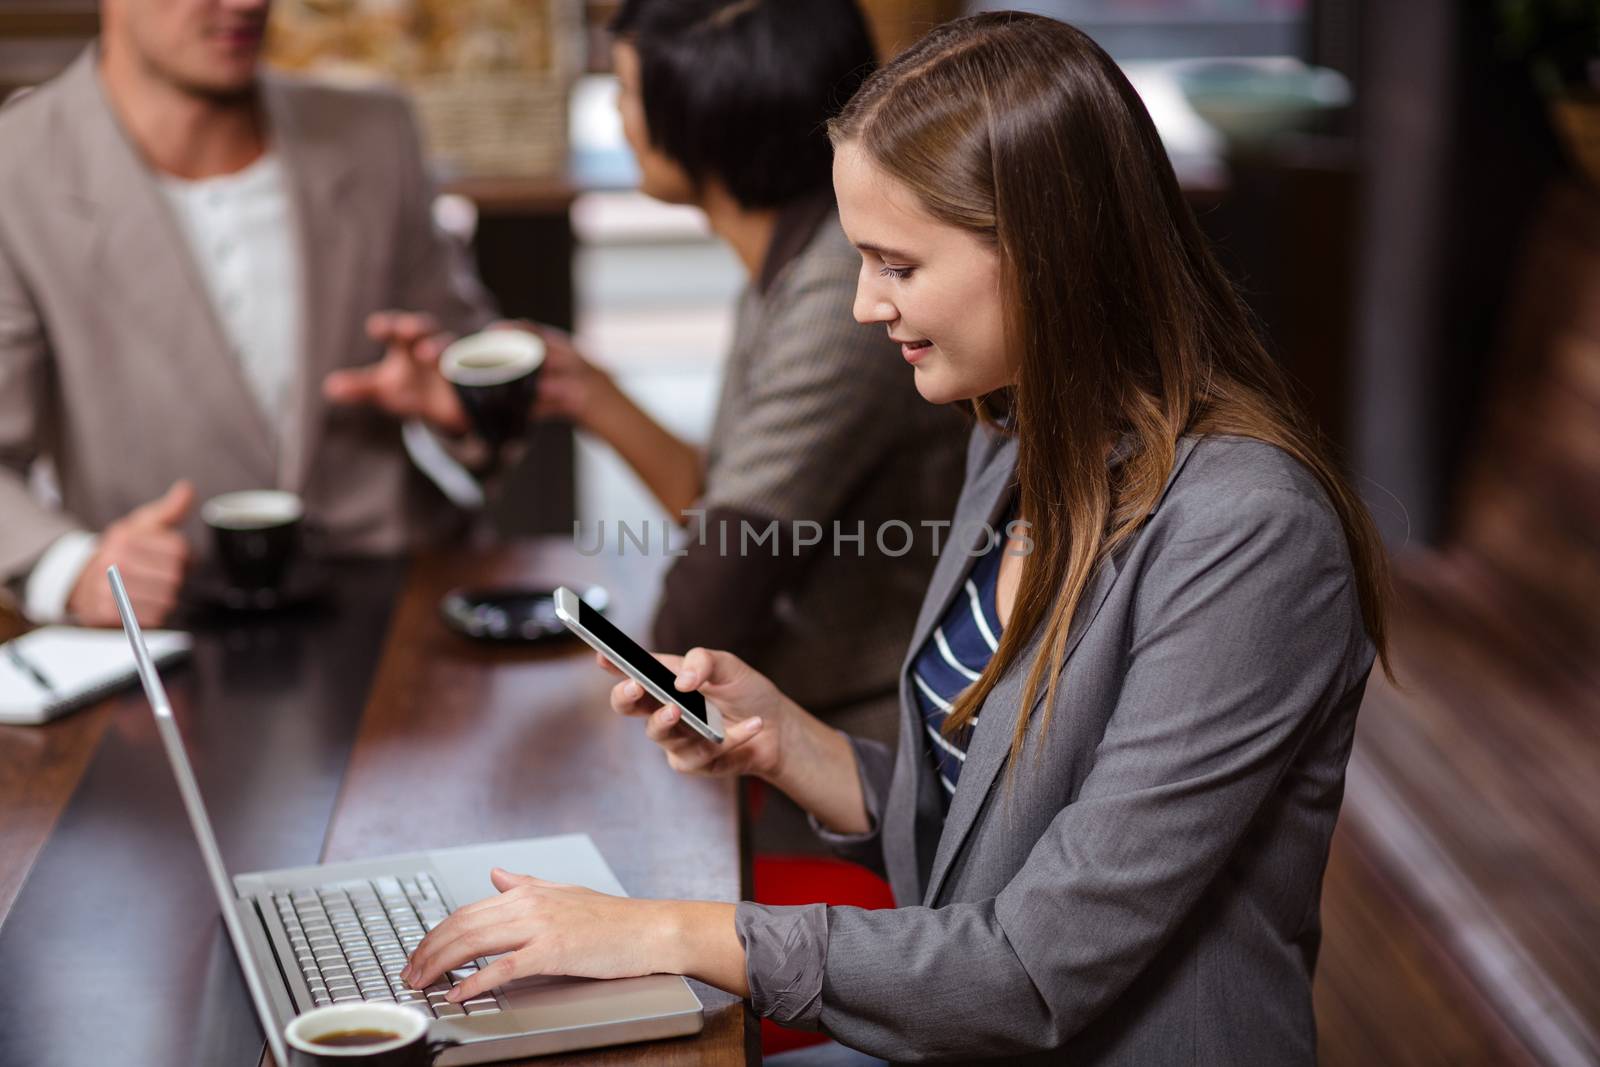 Woman using technology in a cafe